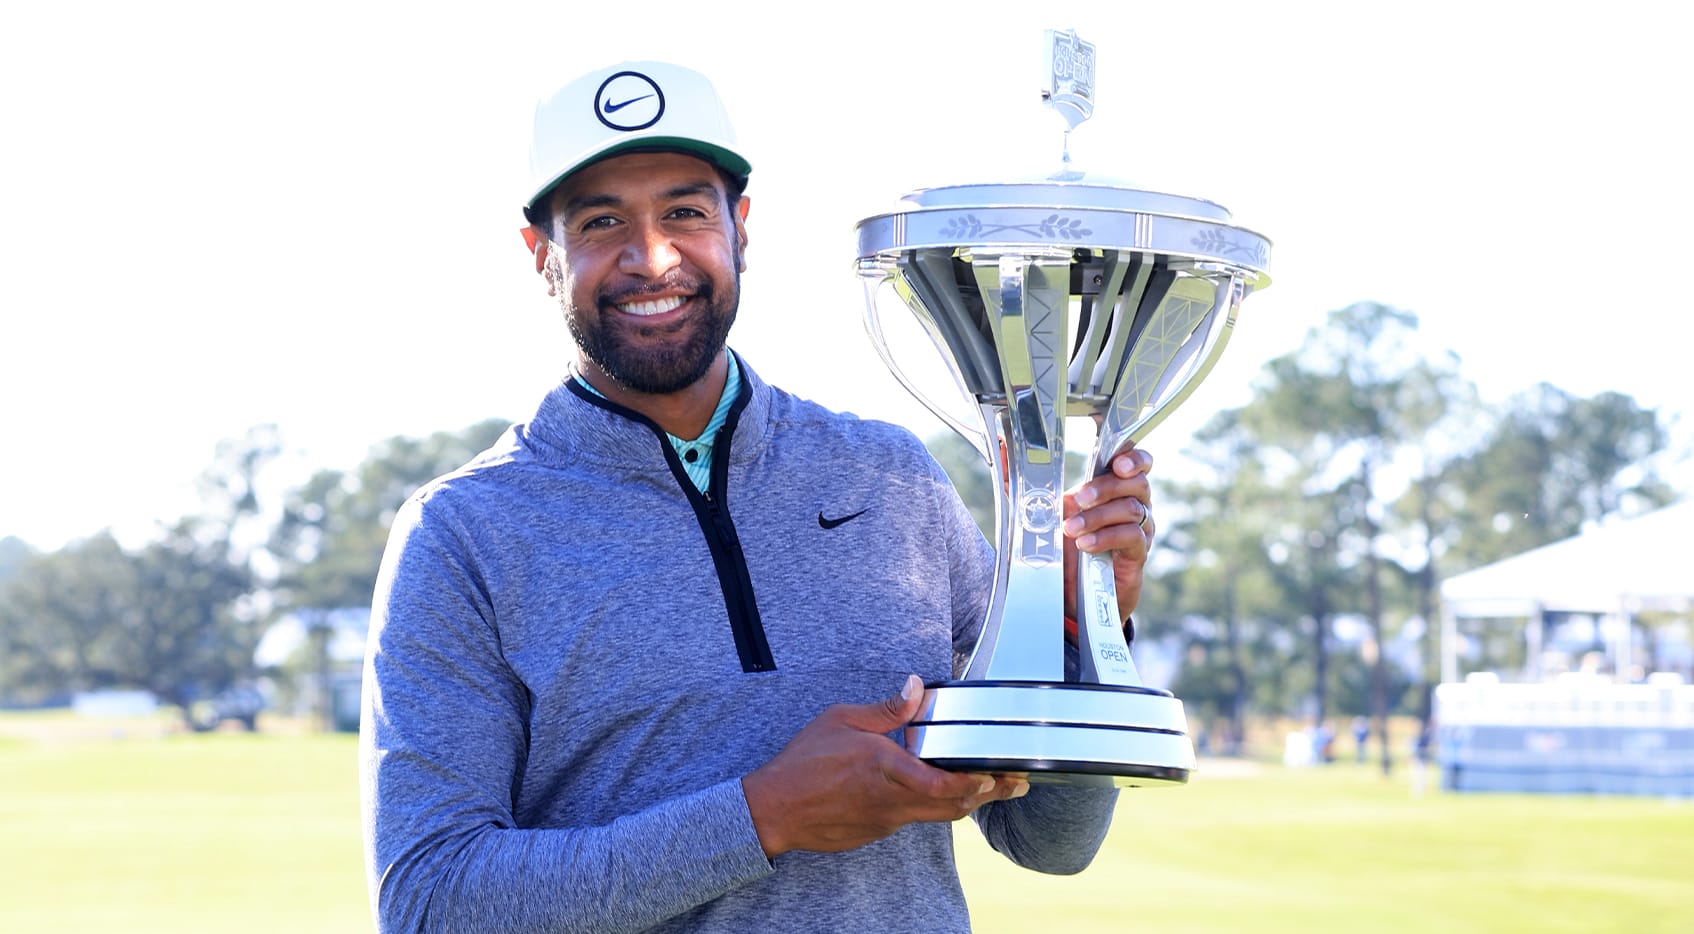 A wellrounded Tony Finau is fulfilling his potential PGA TOUR